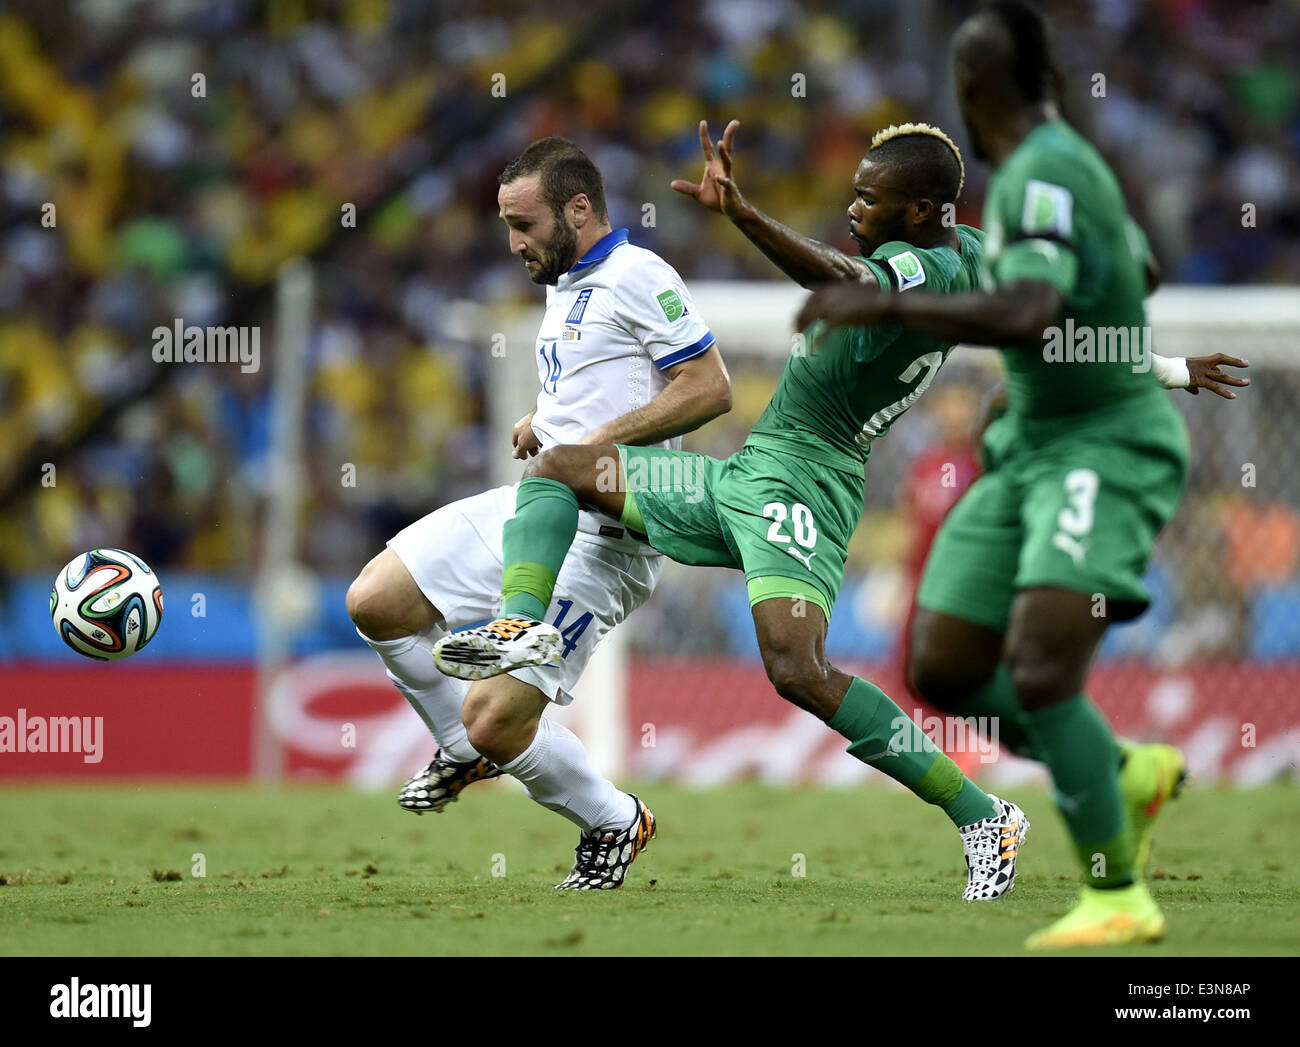 Fortaleza, Brazil. 24th June, 2014. Greece's Dimitris Salpingidis (L) vies with Cote d'Ivoire's Geoffroy Serey Die (C) during a Group C match between Greece and Cote d'Ivoire of 2014 FIFA World Cup at the Estadio Castelao Stadium in Fortaleza, Brazil, June 24, 2014. Credit:  Yang Lei/Xinhua/Alamy Live News Stock Photo